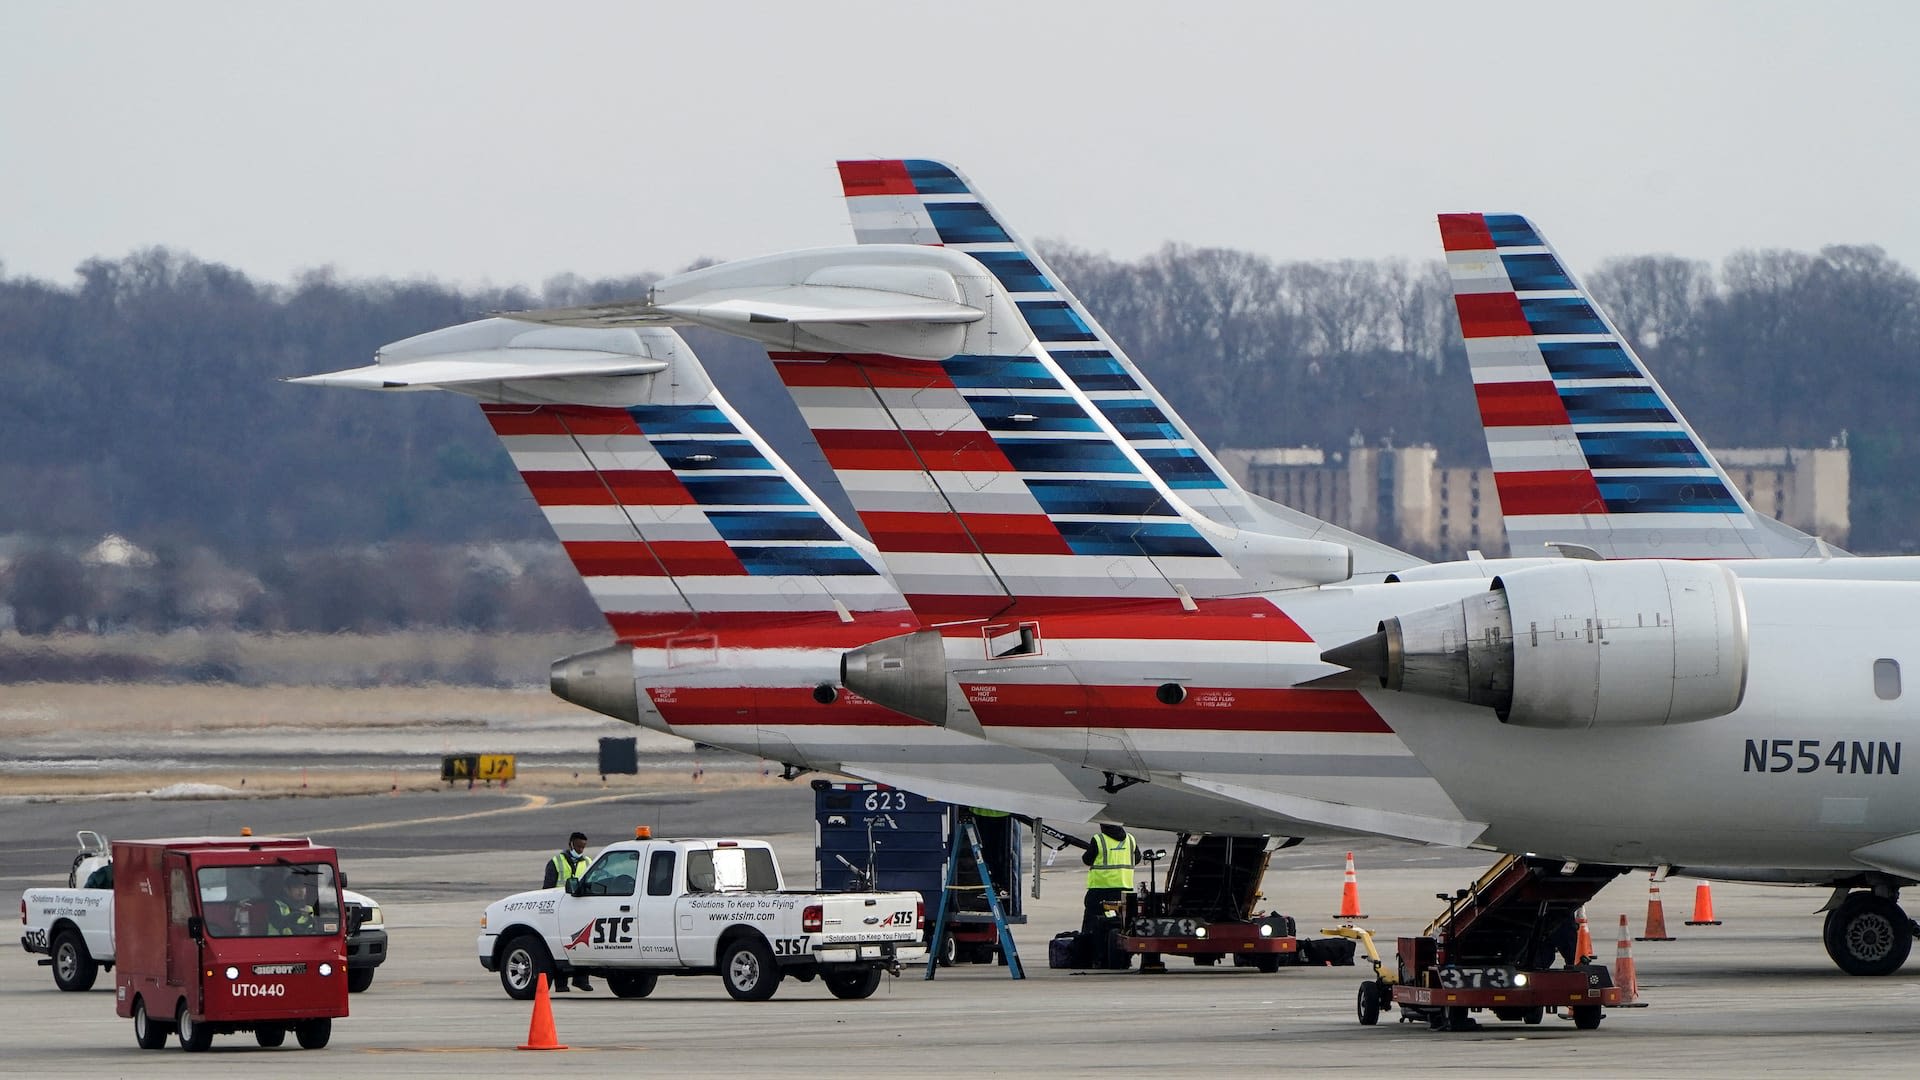 American Airlines sued for race discrimination after removing 8 Black passengers from a flight